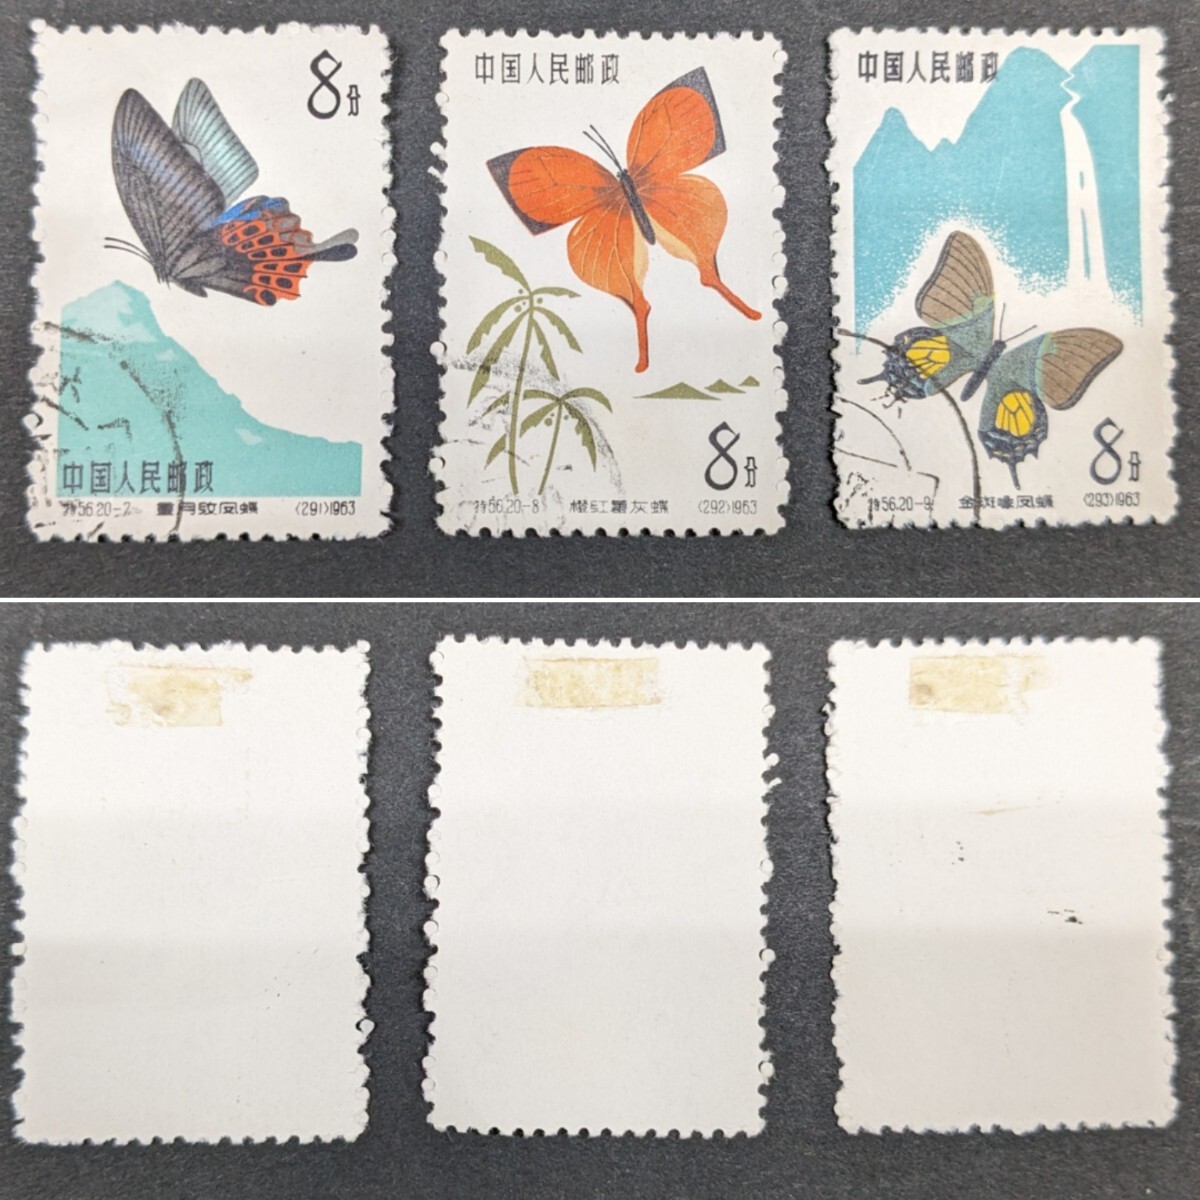  China stamp China person . postal stamp Special 56 butterfly series 20 kind . hinge trace have . seal have antique collector discharge goods 